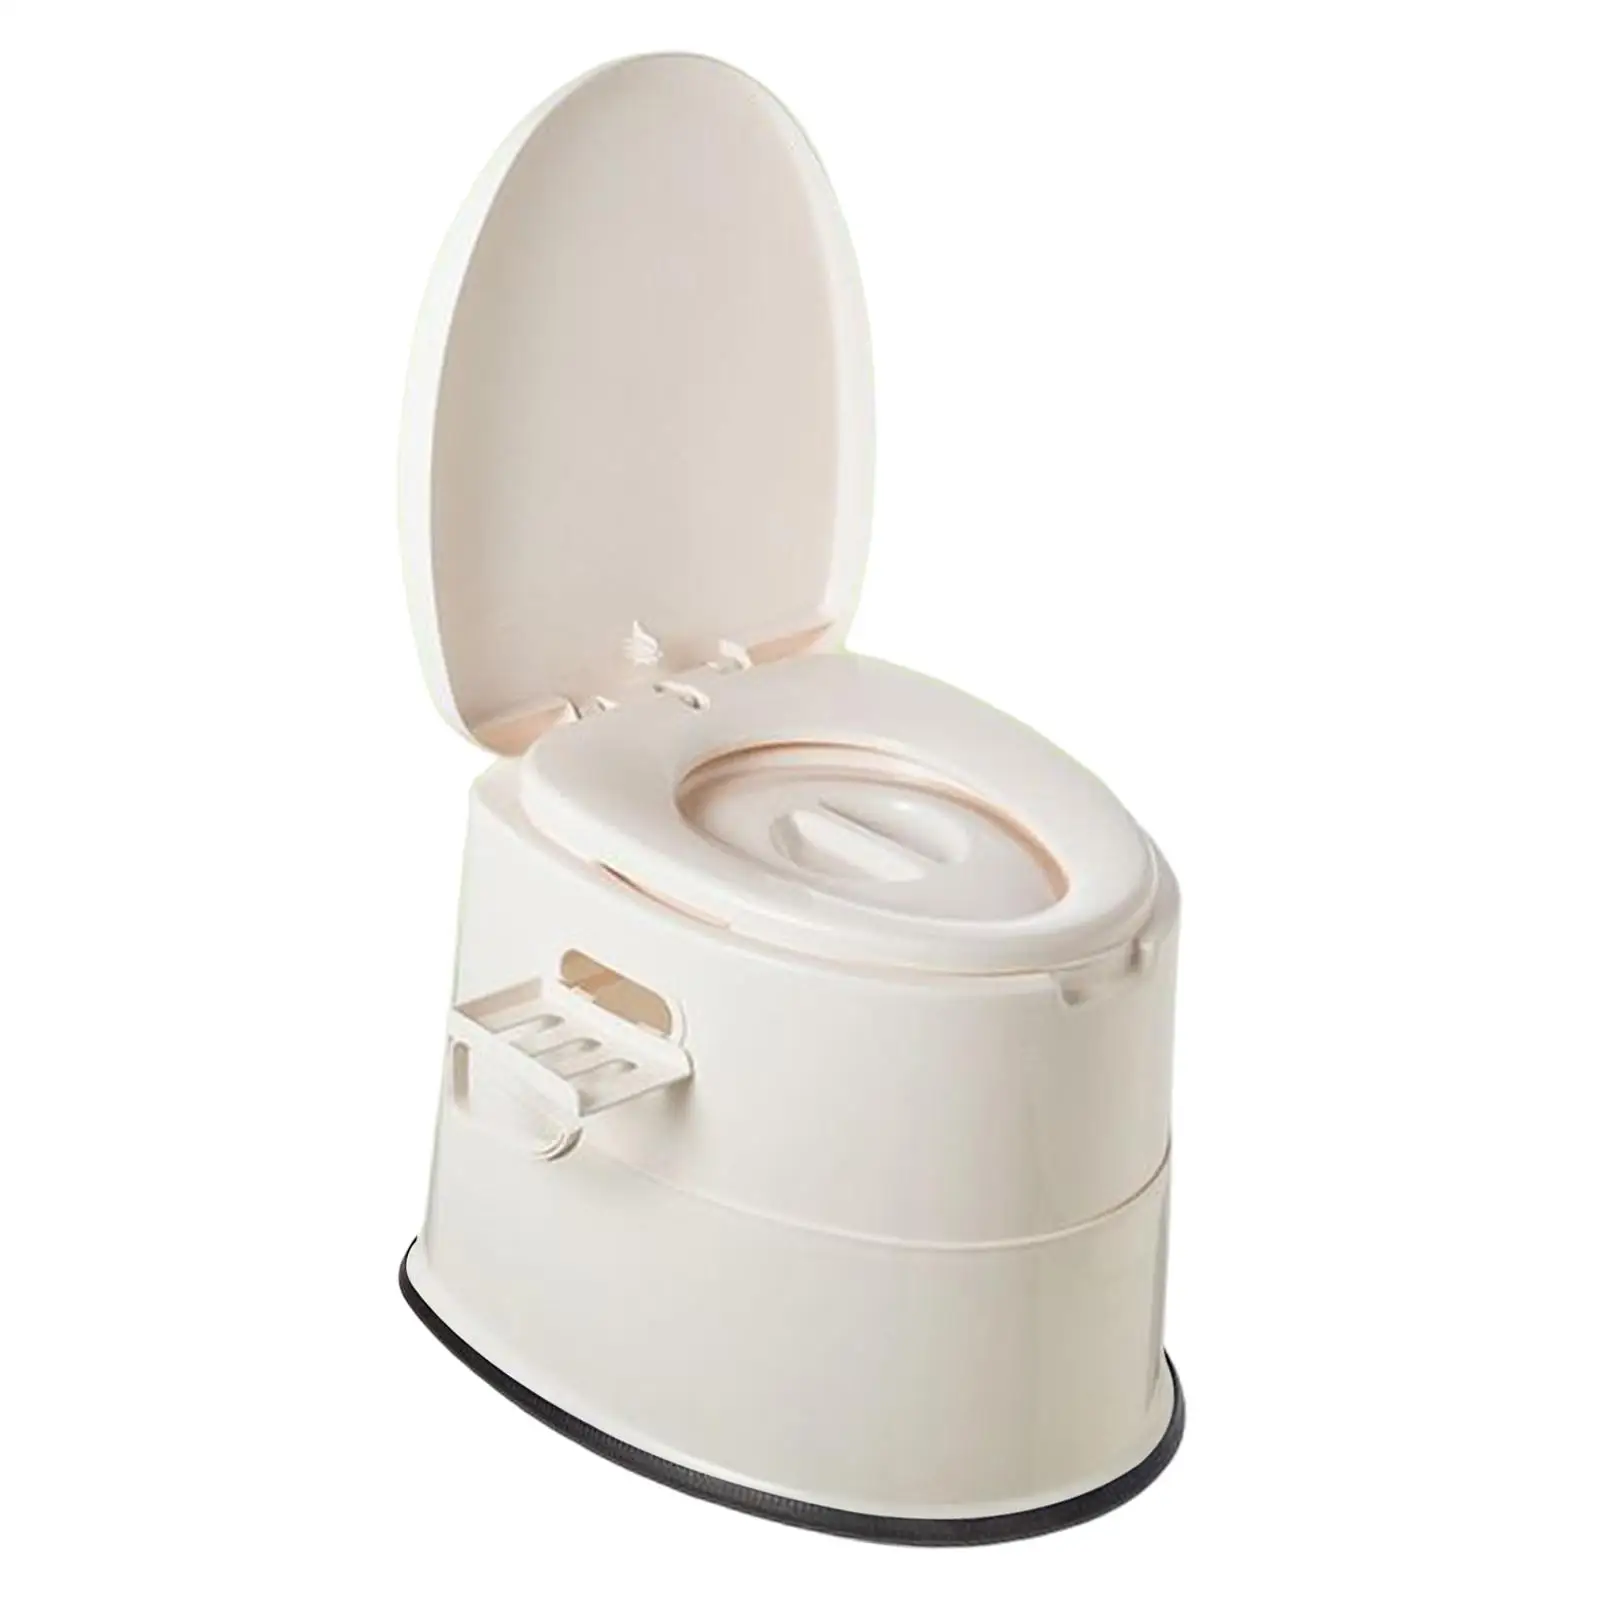 Travel Toilet Mobile Potty Removable Toilet Paper Holder Waterproof Portable Toilet for Adults for Camping Travel RV Boat Home